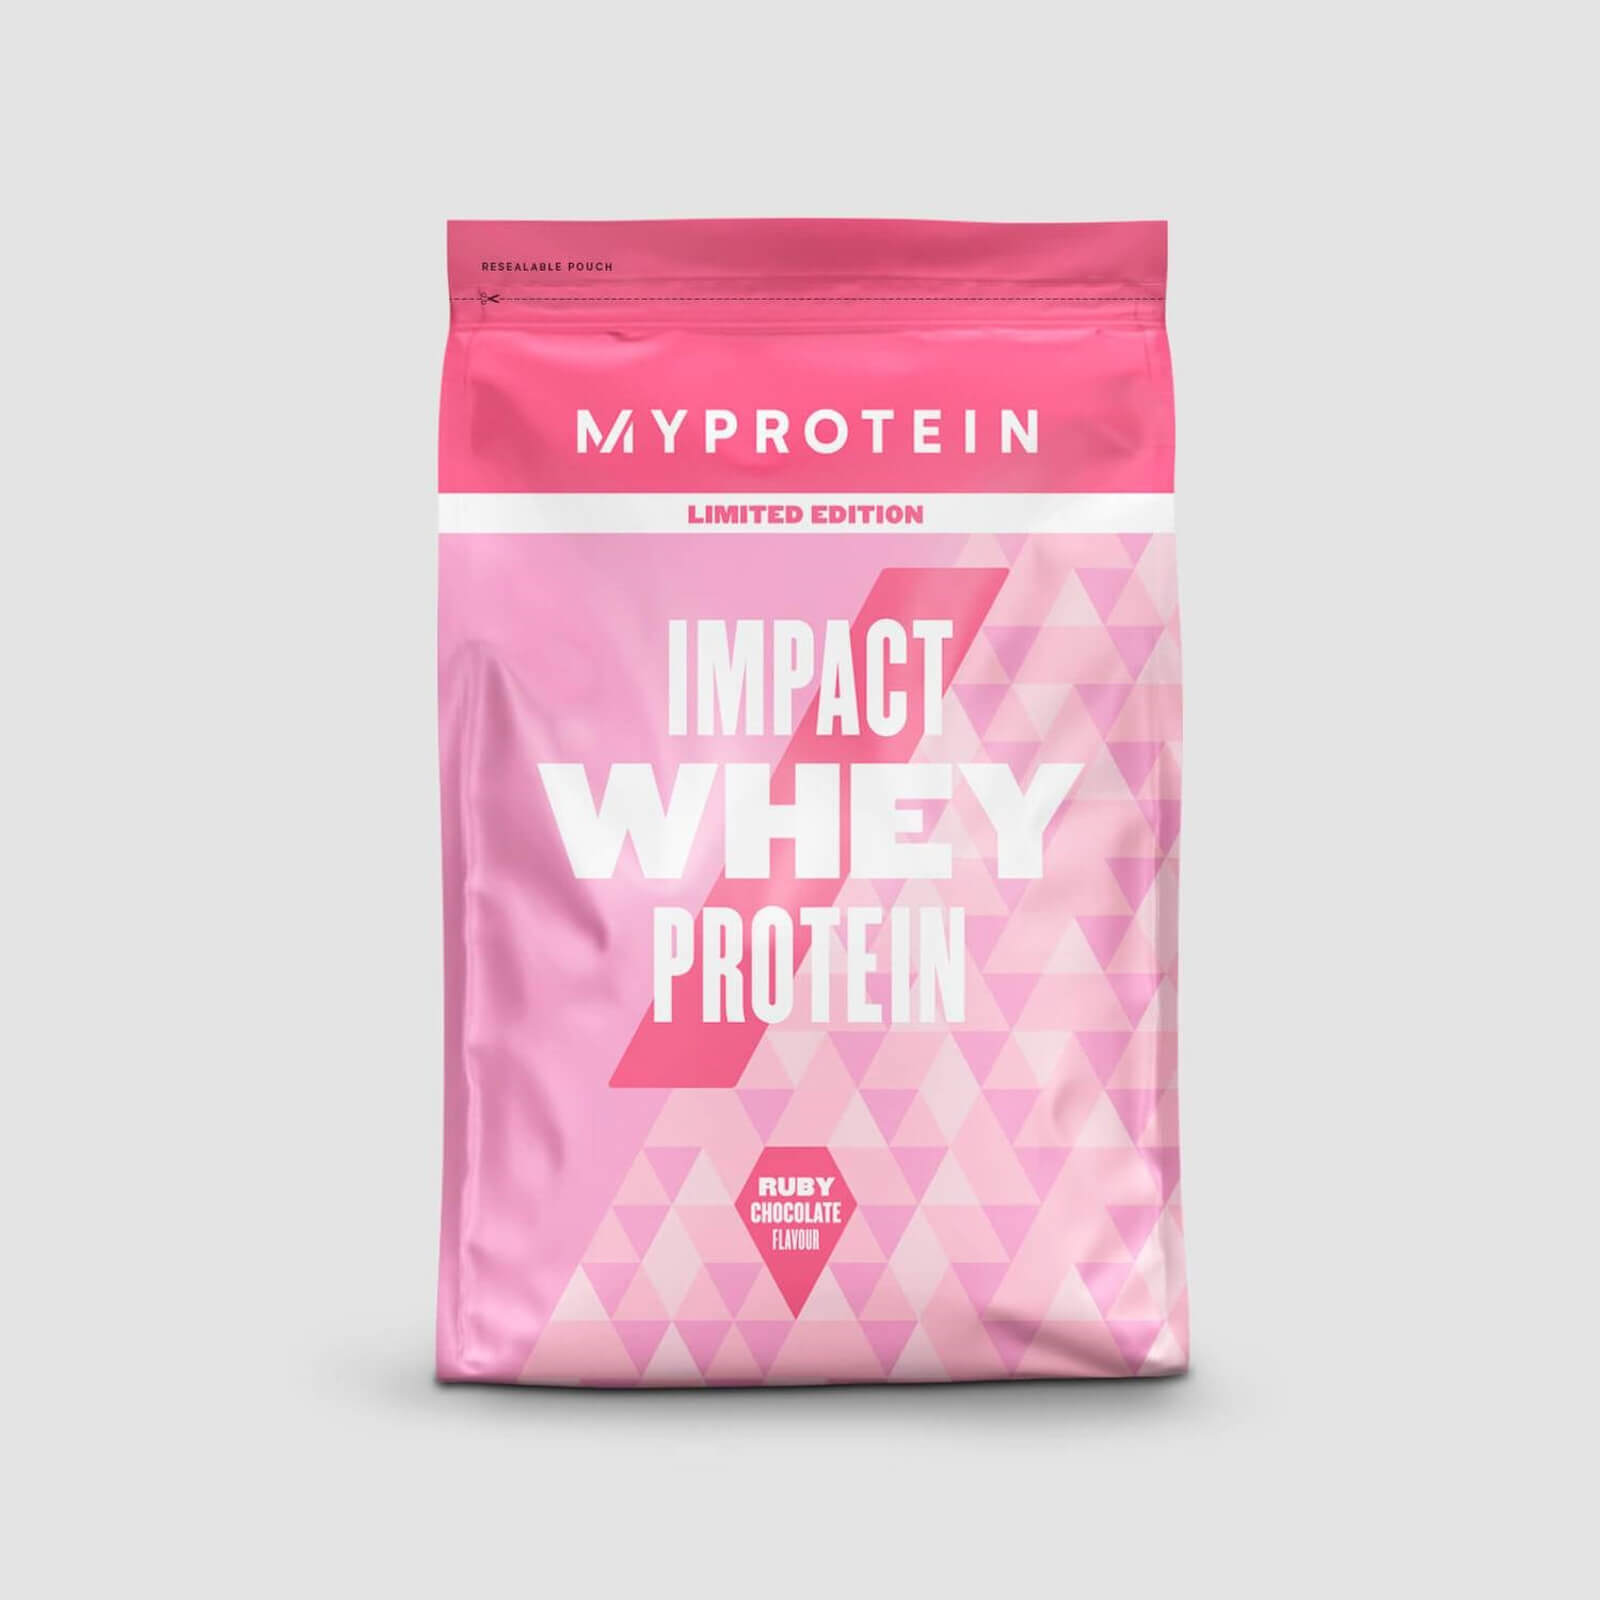 Myprotein Impact Whey Protein – Ruby Chocolate - 250g - Ruby Chocolate